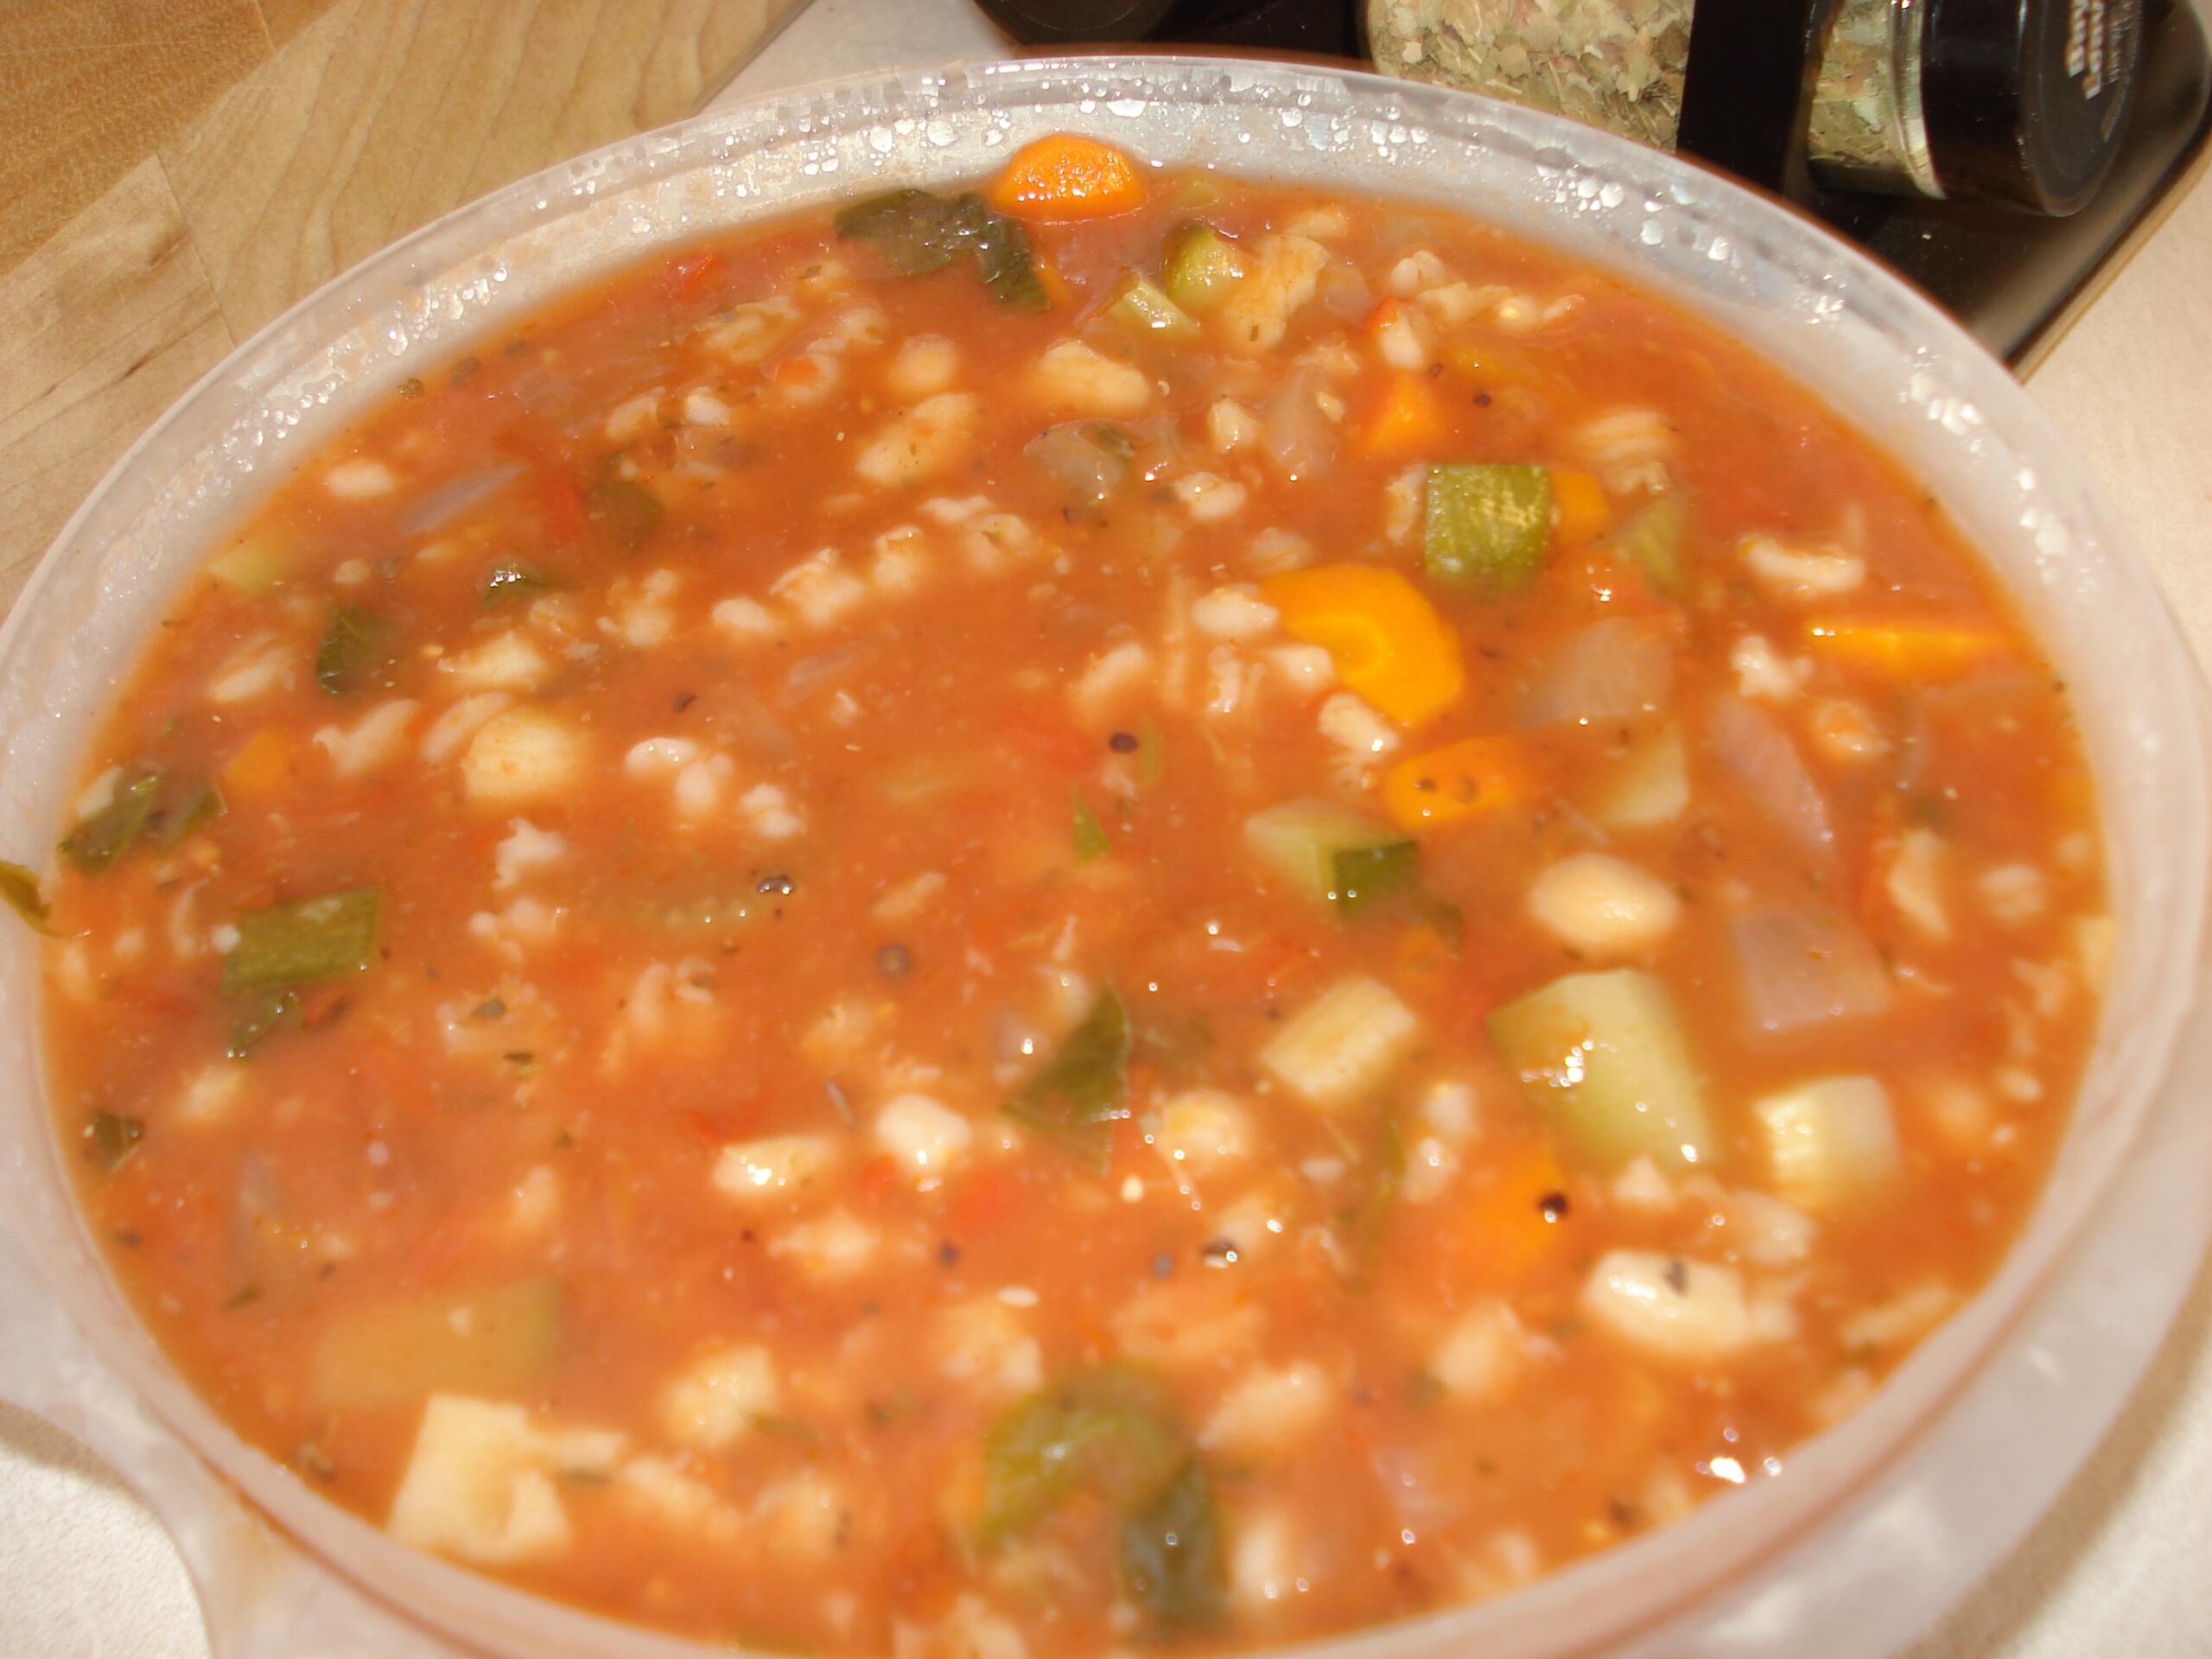  Quick, easy, and packed full of veggies, this minestrone soup will be your new go-to